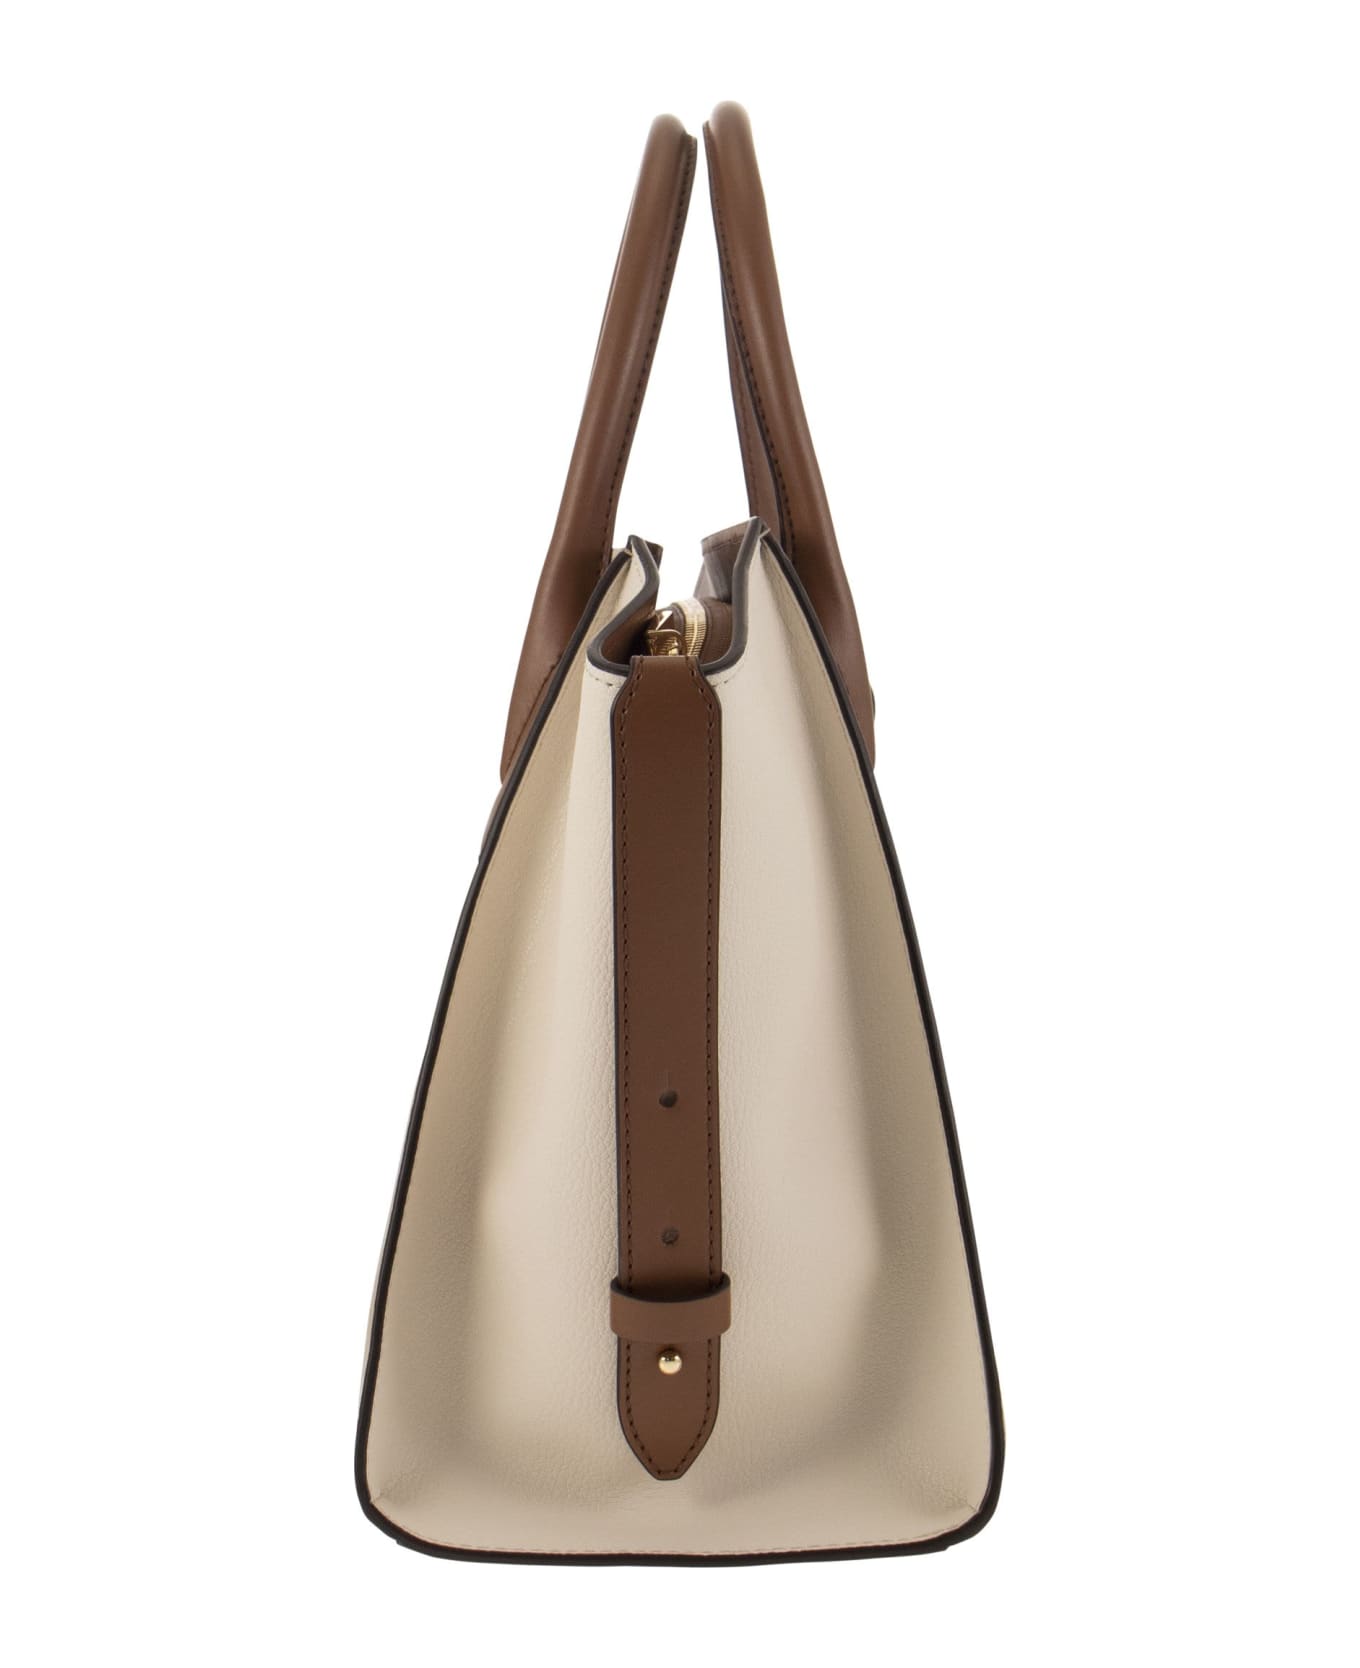 Michael Kors Avril - Colour-block Grained Leather Handbag With Zip - Camel/ivory